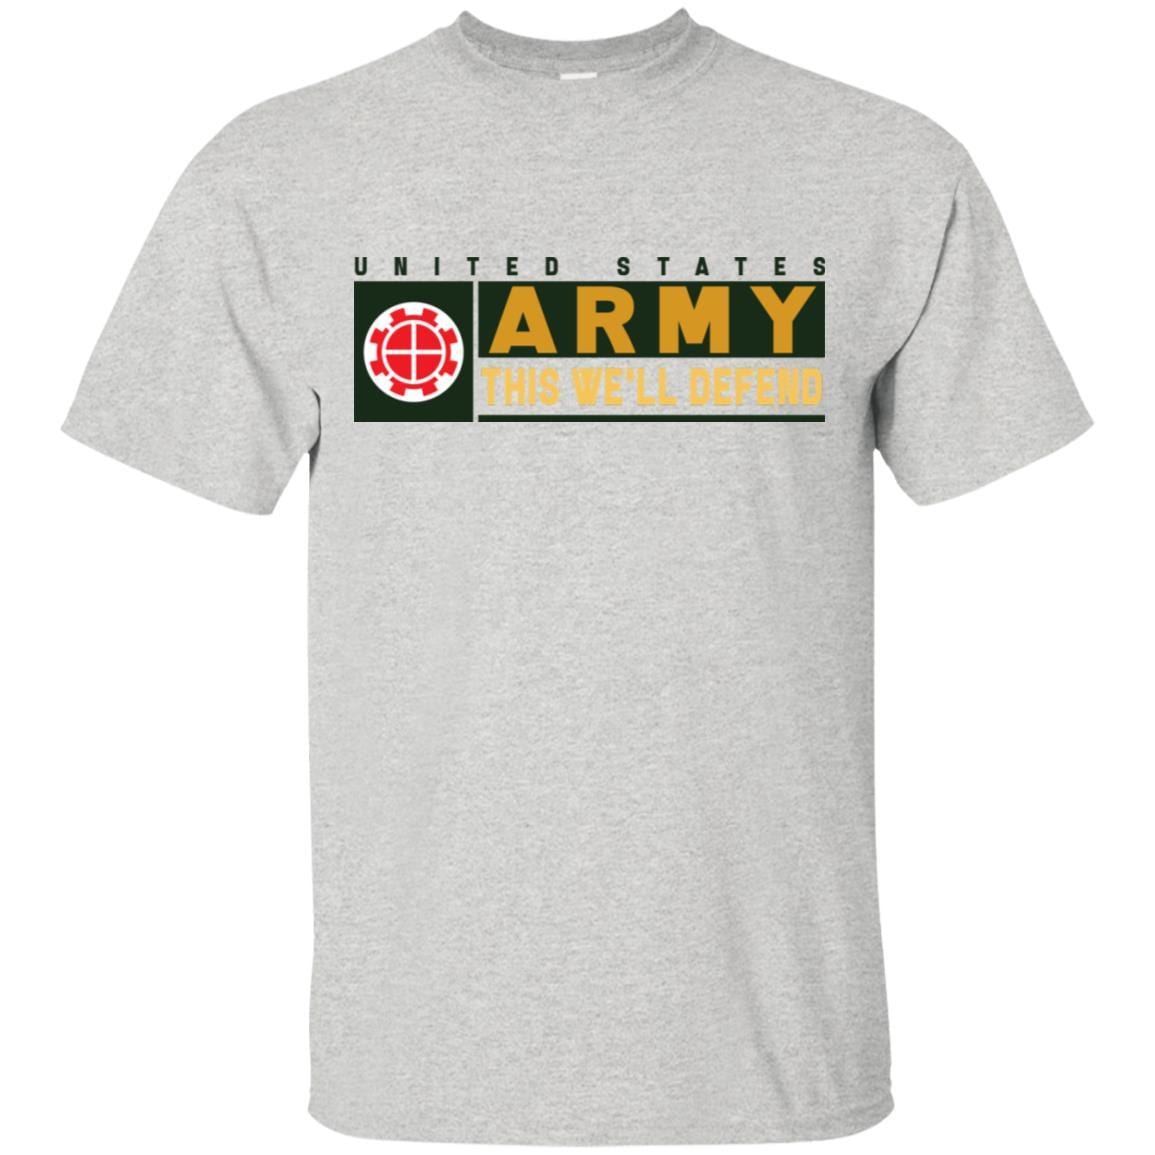 US Army 35TH ENGINEER BRIGADE- This We'll Defend T-Shirt On Front For Men-TShirt-Army-Veterans Nation